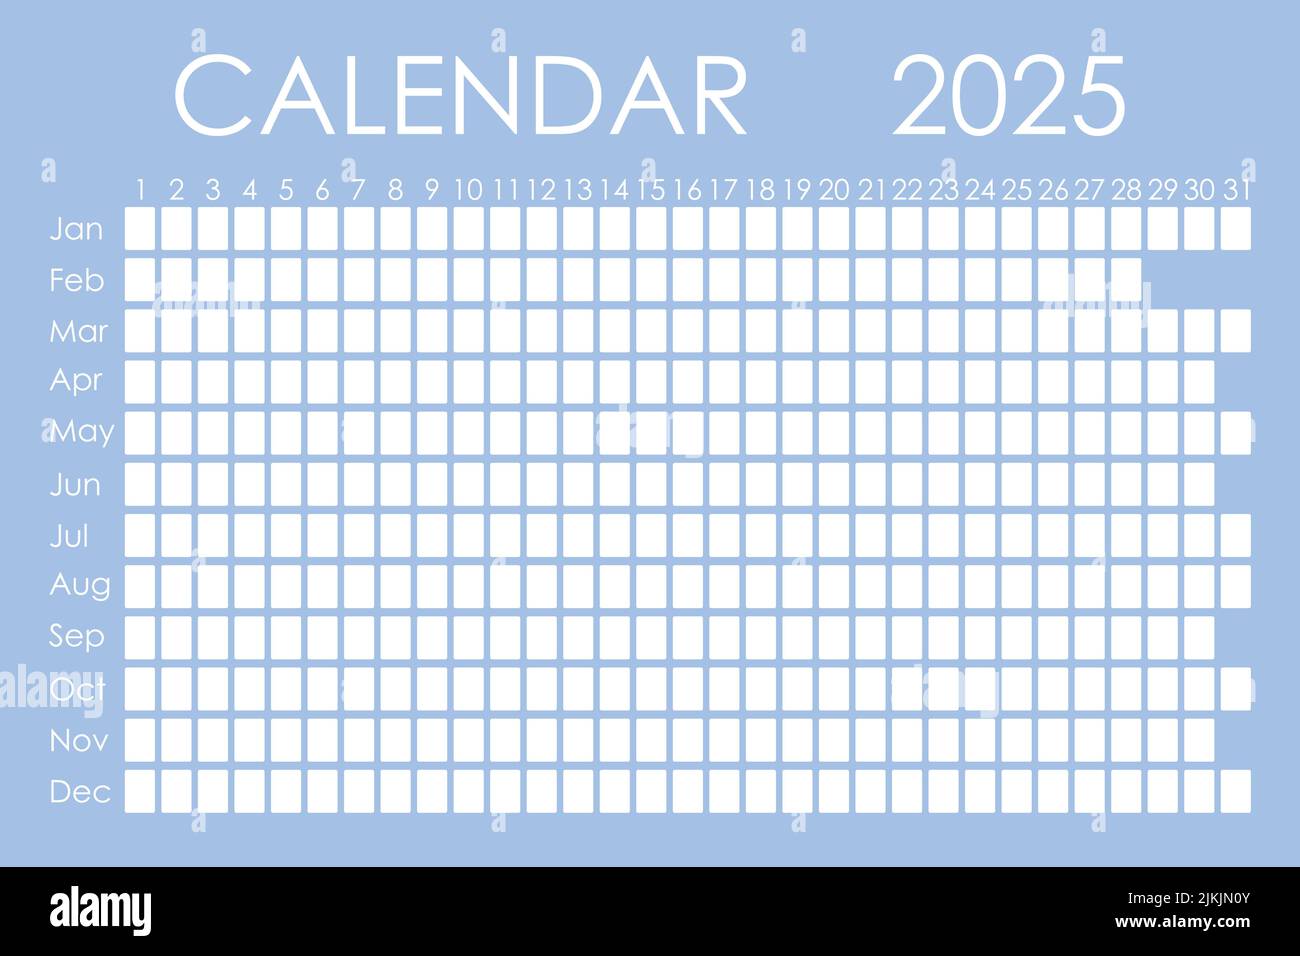 2025-calendar-planner-corporate-design-week-isolated-on-color